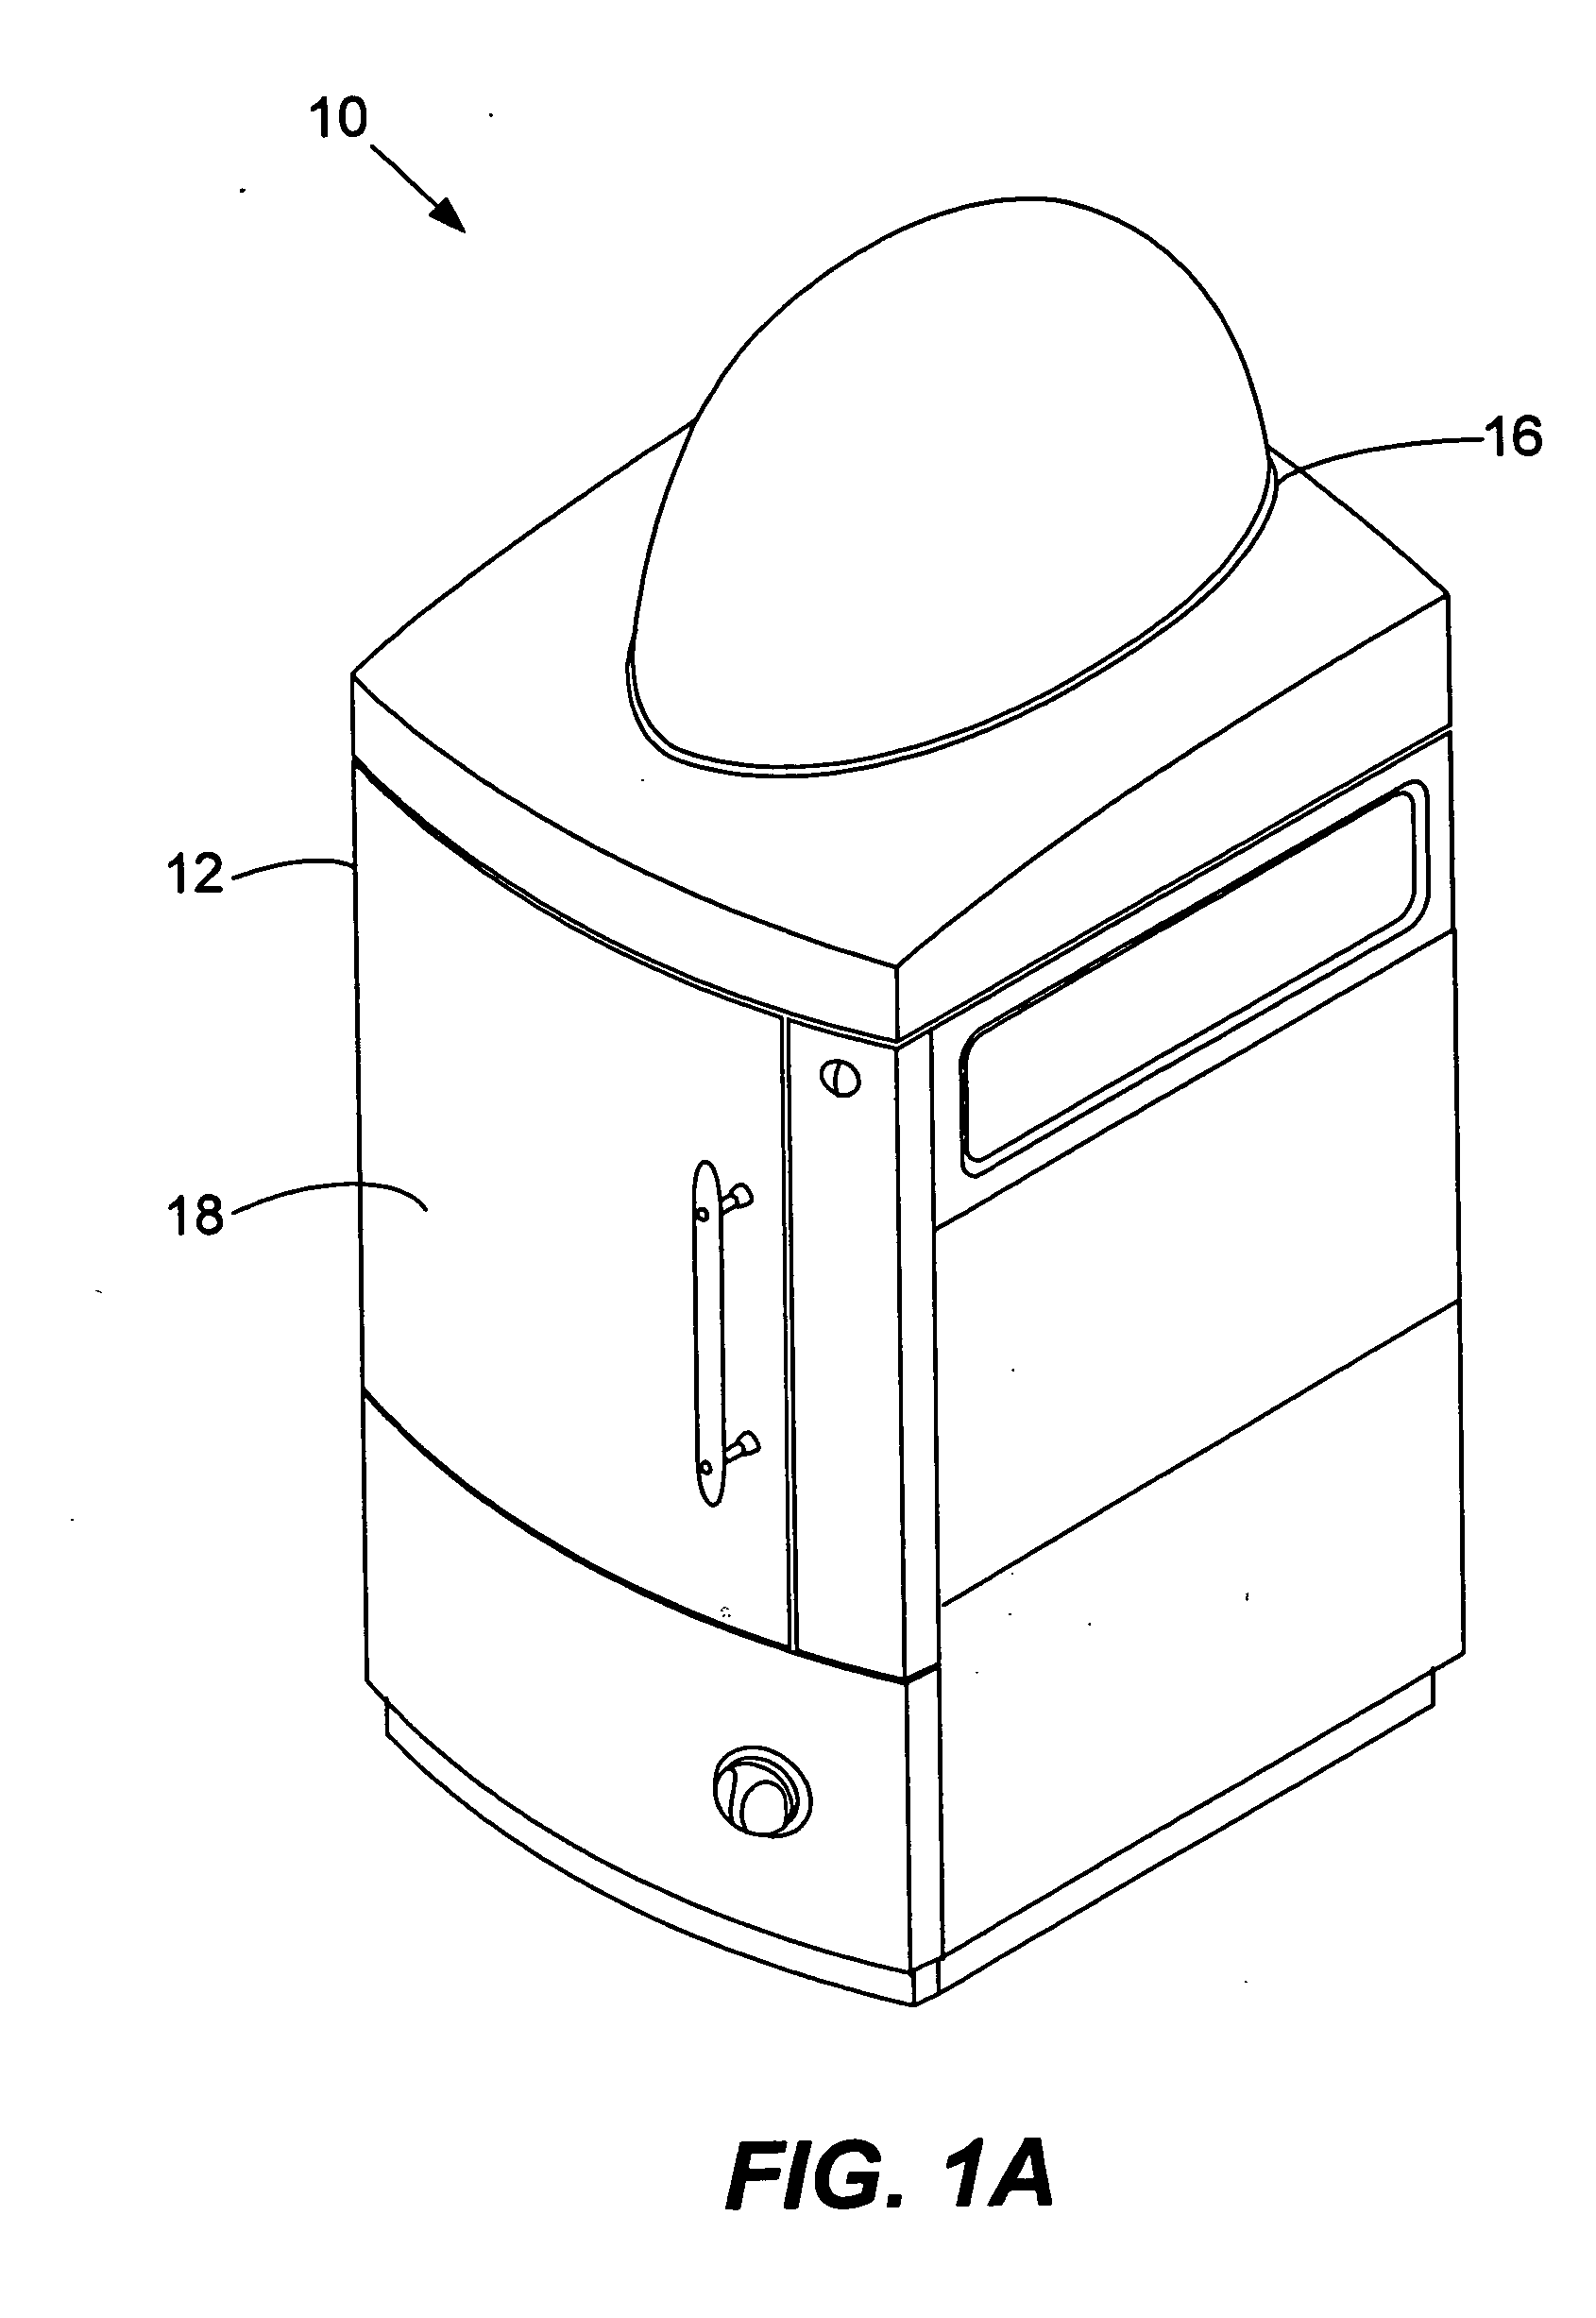 Phantom calibration device for low level light imaging systems